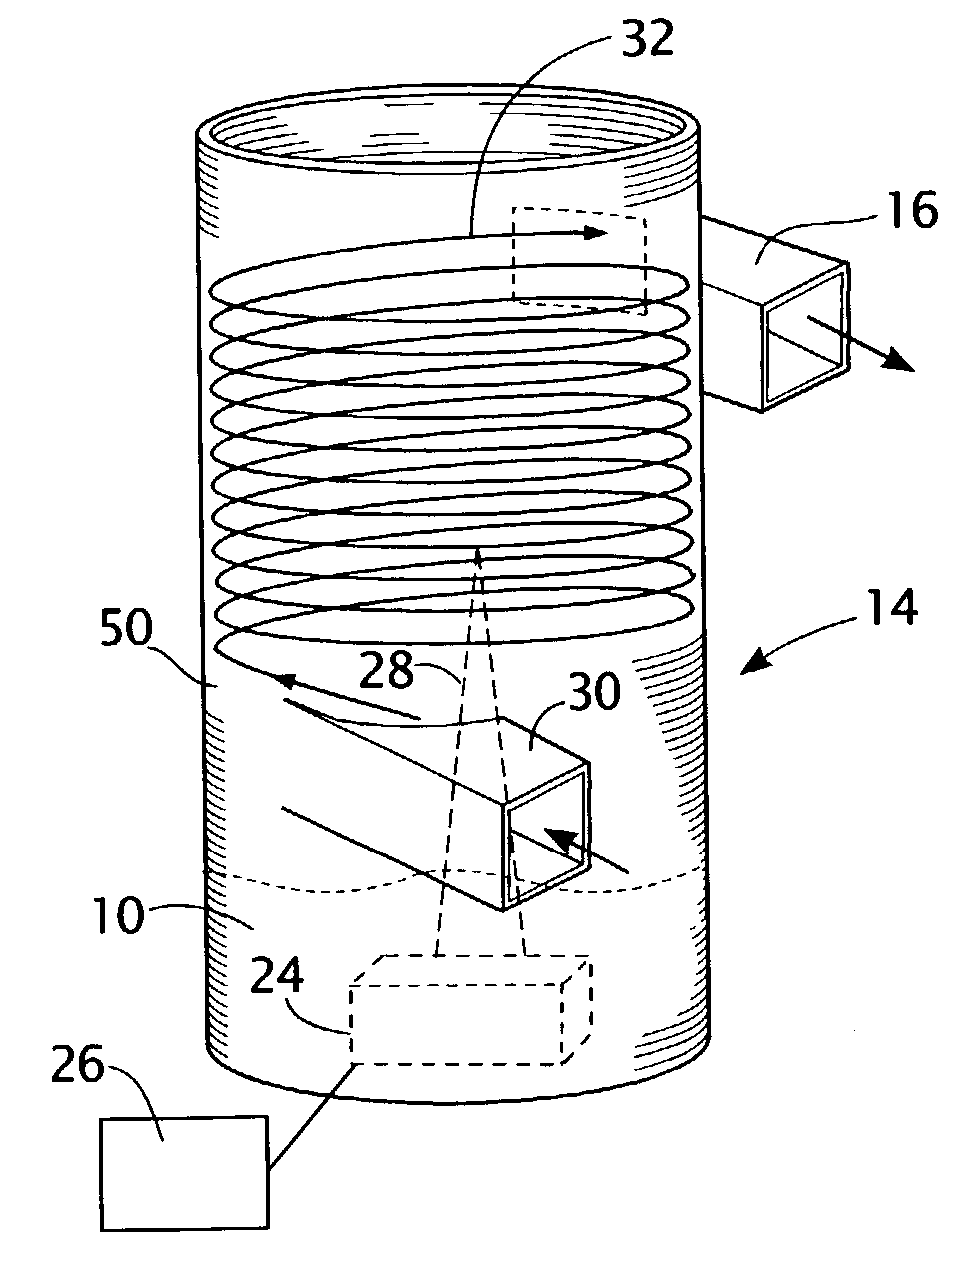 Apparatus and method for fine mist sterilization or sanitation using a biocide